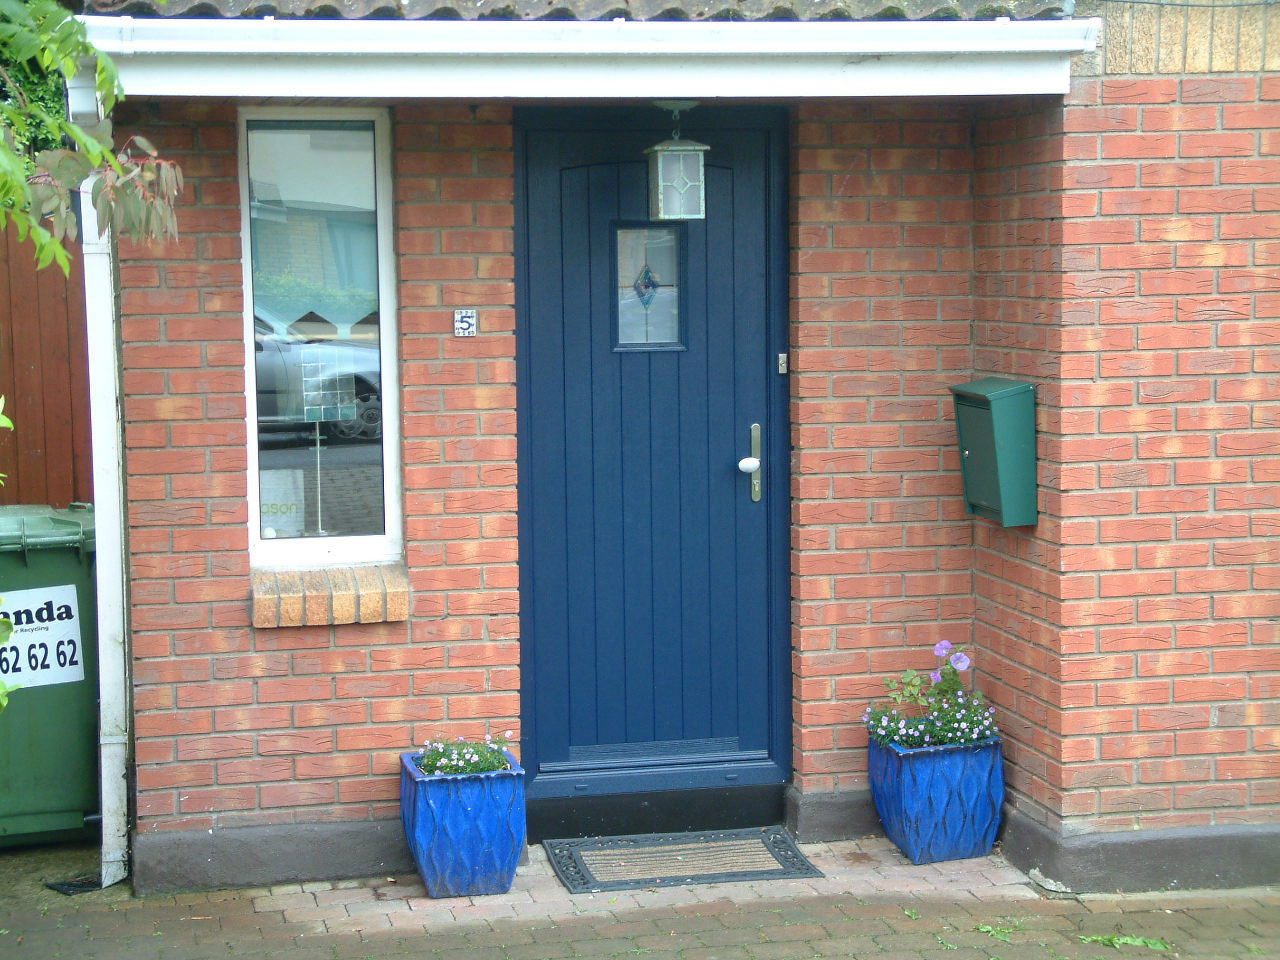 BLUE APEER APY2 COMPOSITE fRONT DOOR FITTED BY ASGARD WINDOWS IN DUBLIN.